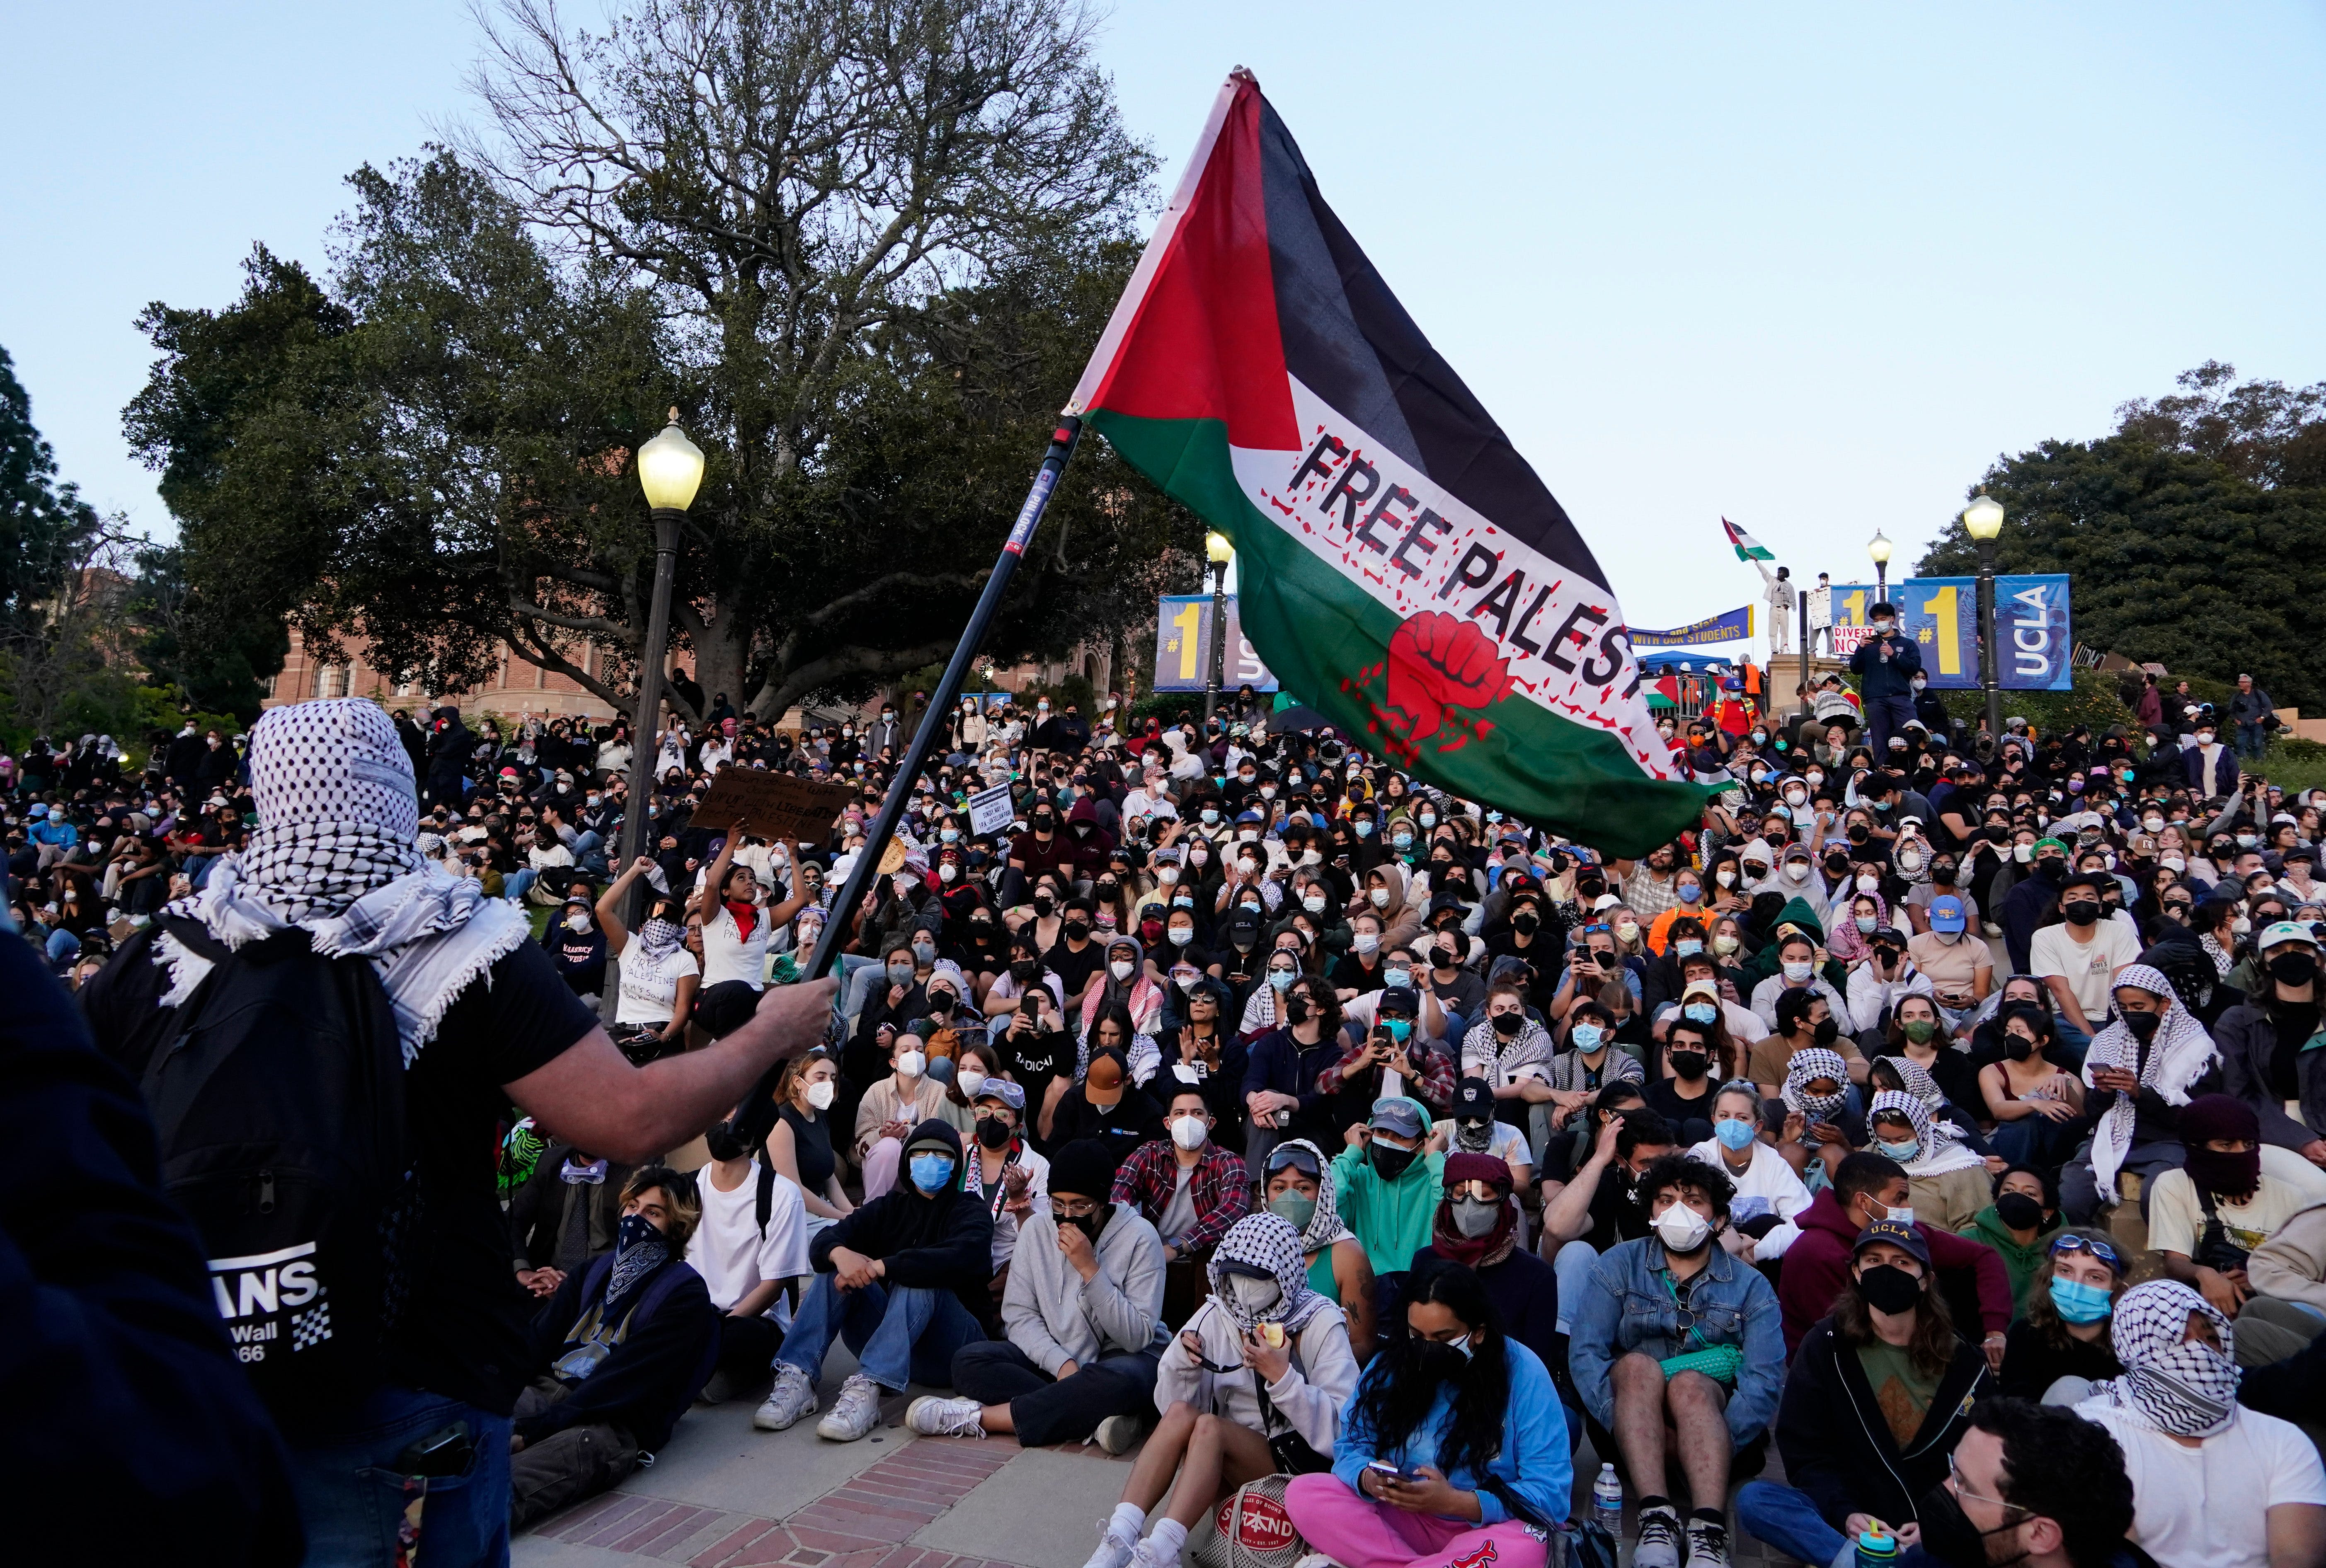 Judge tells UCLA it must protect Jewish students' equal access on campus